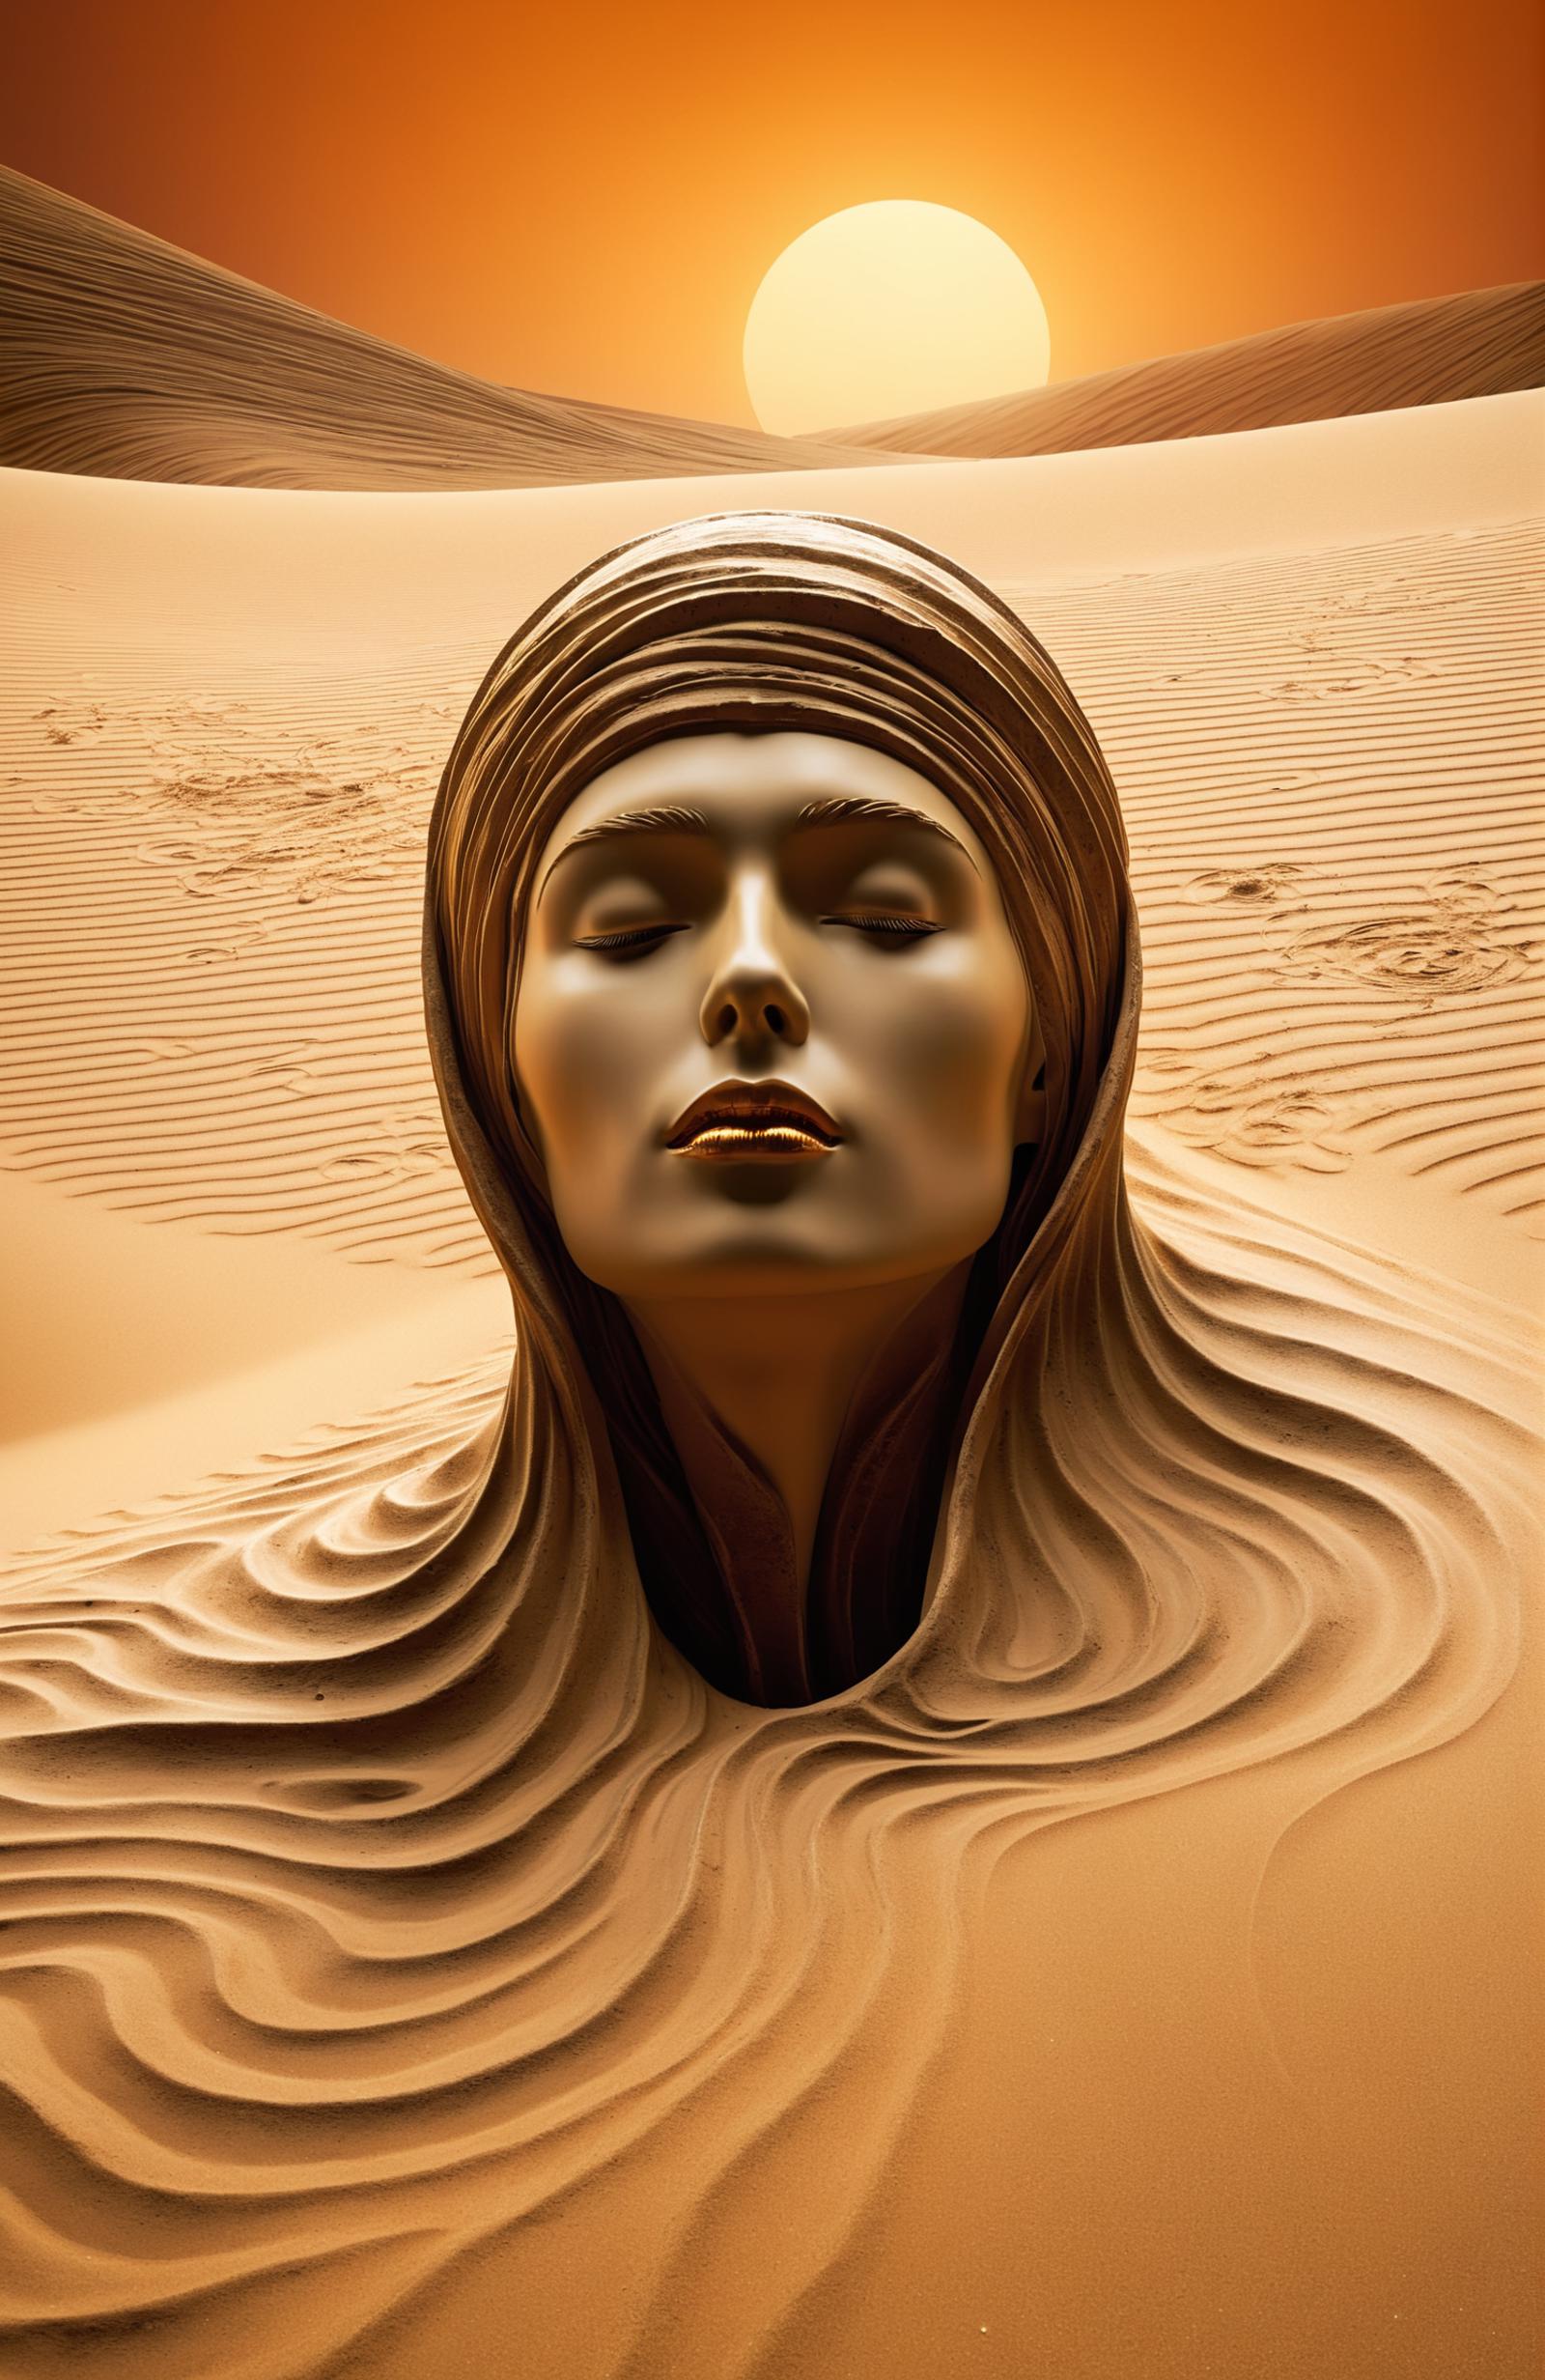 A sand sculpture of a woman's head with her eyes closed.